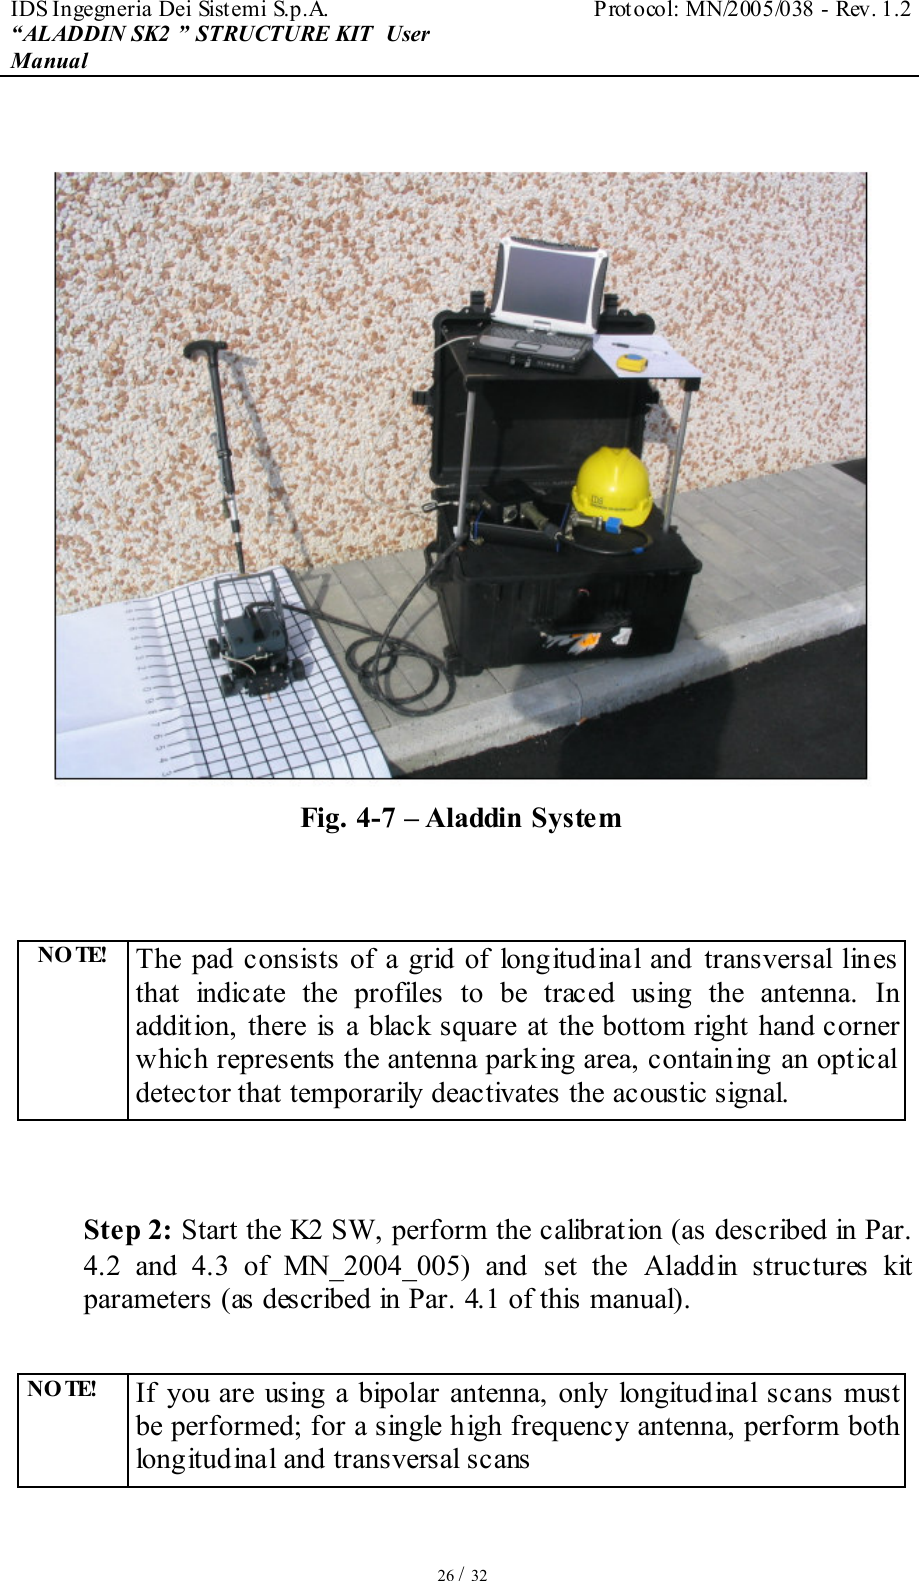 IDS Ingegneria Dei Sistemi S.p.A.  Protocol: MN/2005/038 - Rev. 1.2 “ALADDIN SK2 ” STRUCTURE KIT  User Manual   26 / 32   Fig. 4-7 – Aladdin System   NO TE!  The pad consists of  a grid of longitudinal  and transversal lines that  indicate  the  profiles  to  be  traced  using  the  antenna.  In addition,  there is a black square at the  bottom right hand corner which represents the antenna parking area, containing an optical detector that temporarily deactivates the acoustic signal.   Step 2: Start the K2 SW, perform the calibration (as described in Par. 4.2  and  4.3  of  MN_2004_005)  and  set  the  Aladdin  structures  kit parameters (as described in Par. 4.1 of this manual).  NO TE!  If  you are using  a bipolar  antenna,  only longitudinal  scans  must be performed; for a single high frequency antenna, perform both longitudinal and transversal scans 